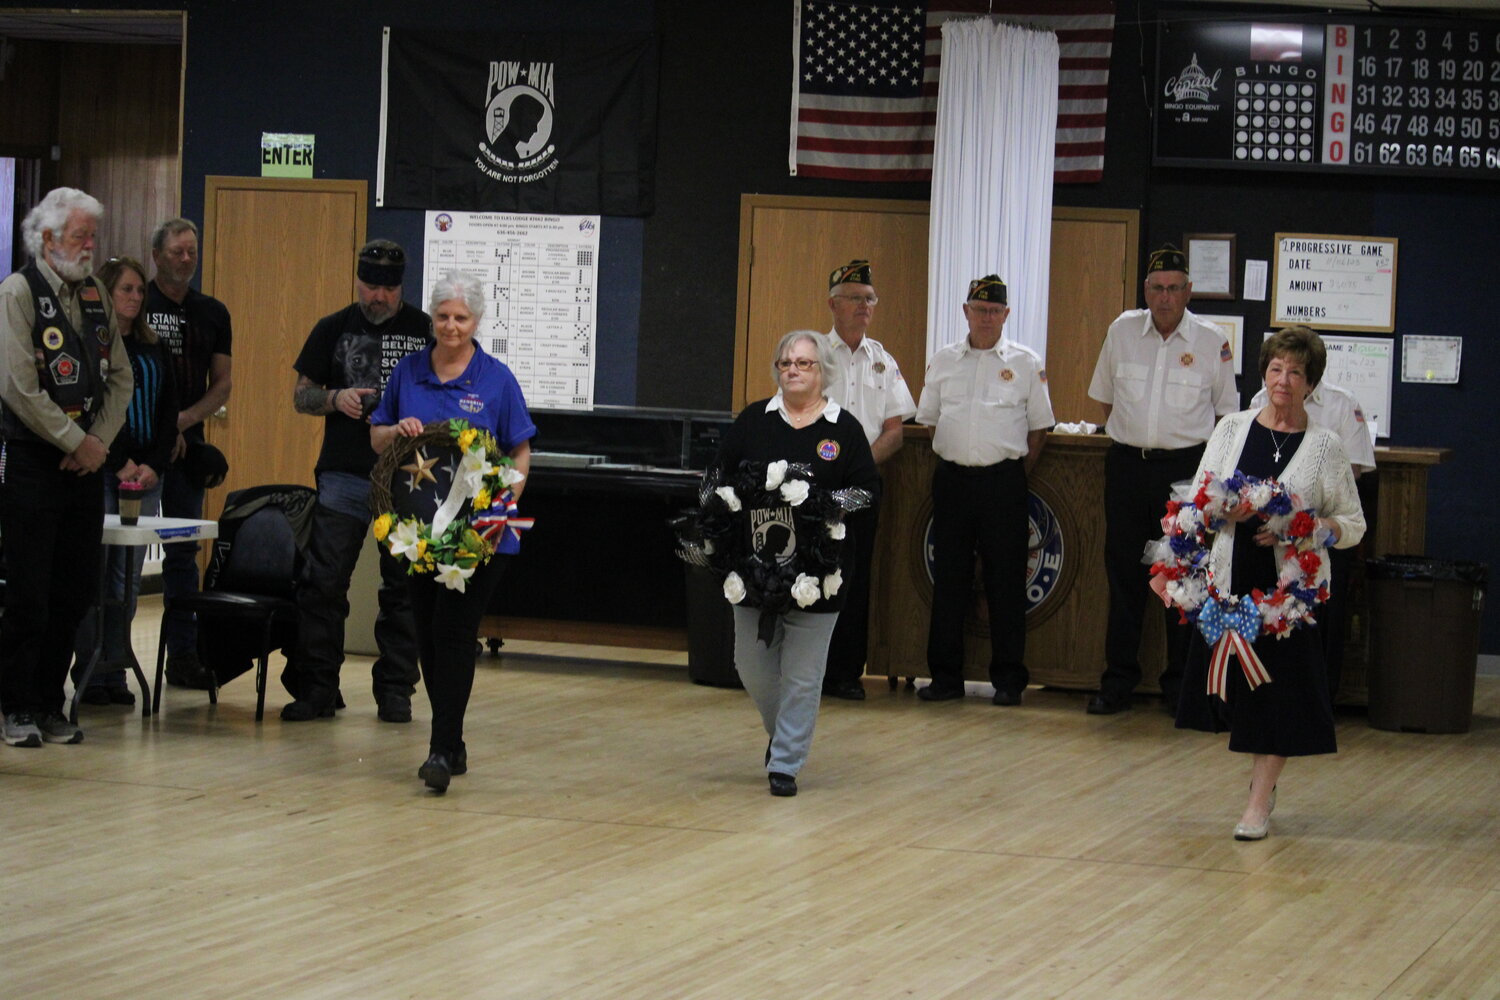 Wreaths were placed in honor of veterans near the end of the ceremony.